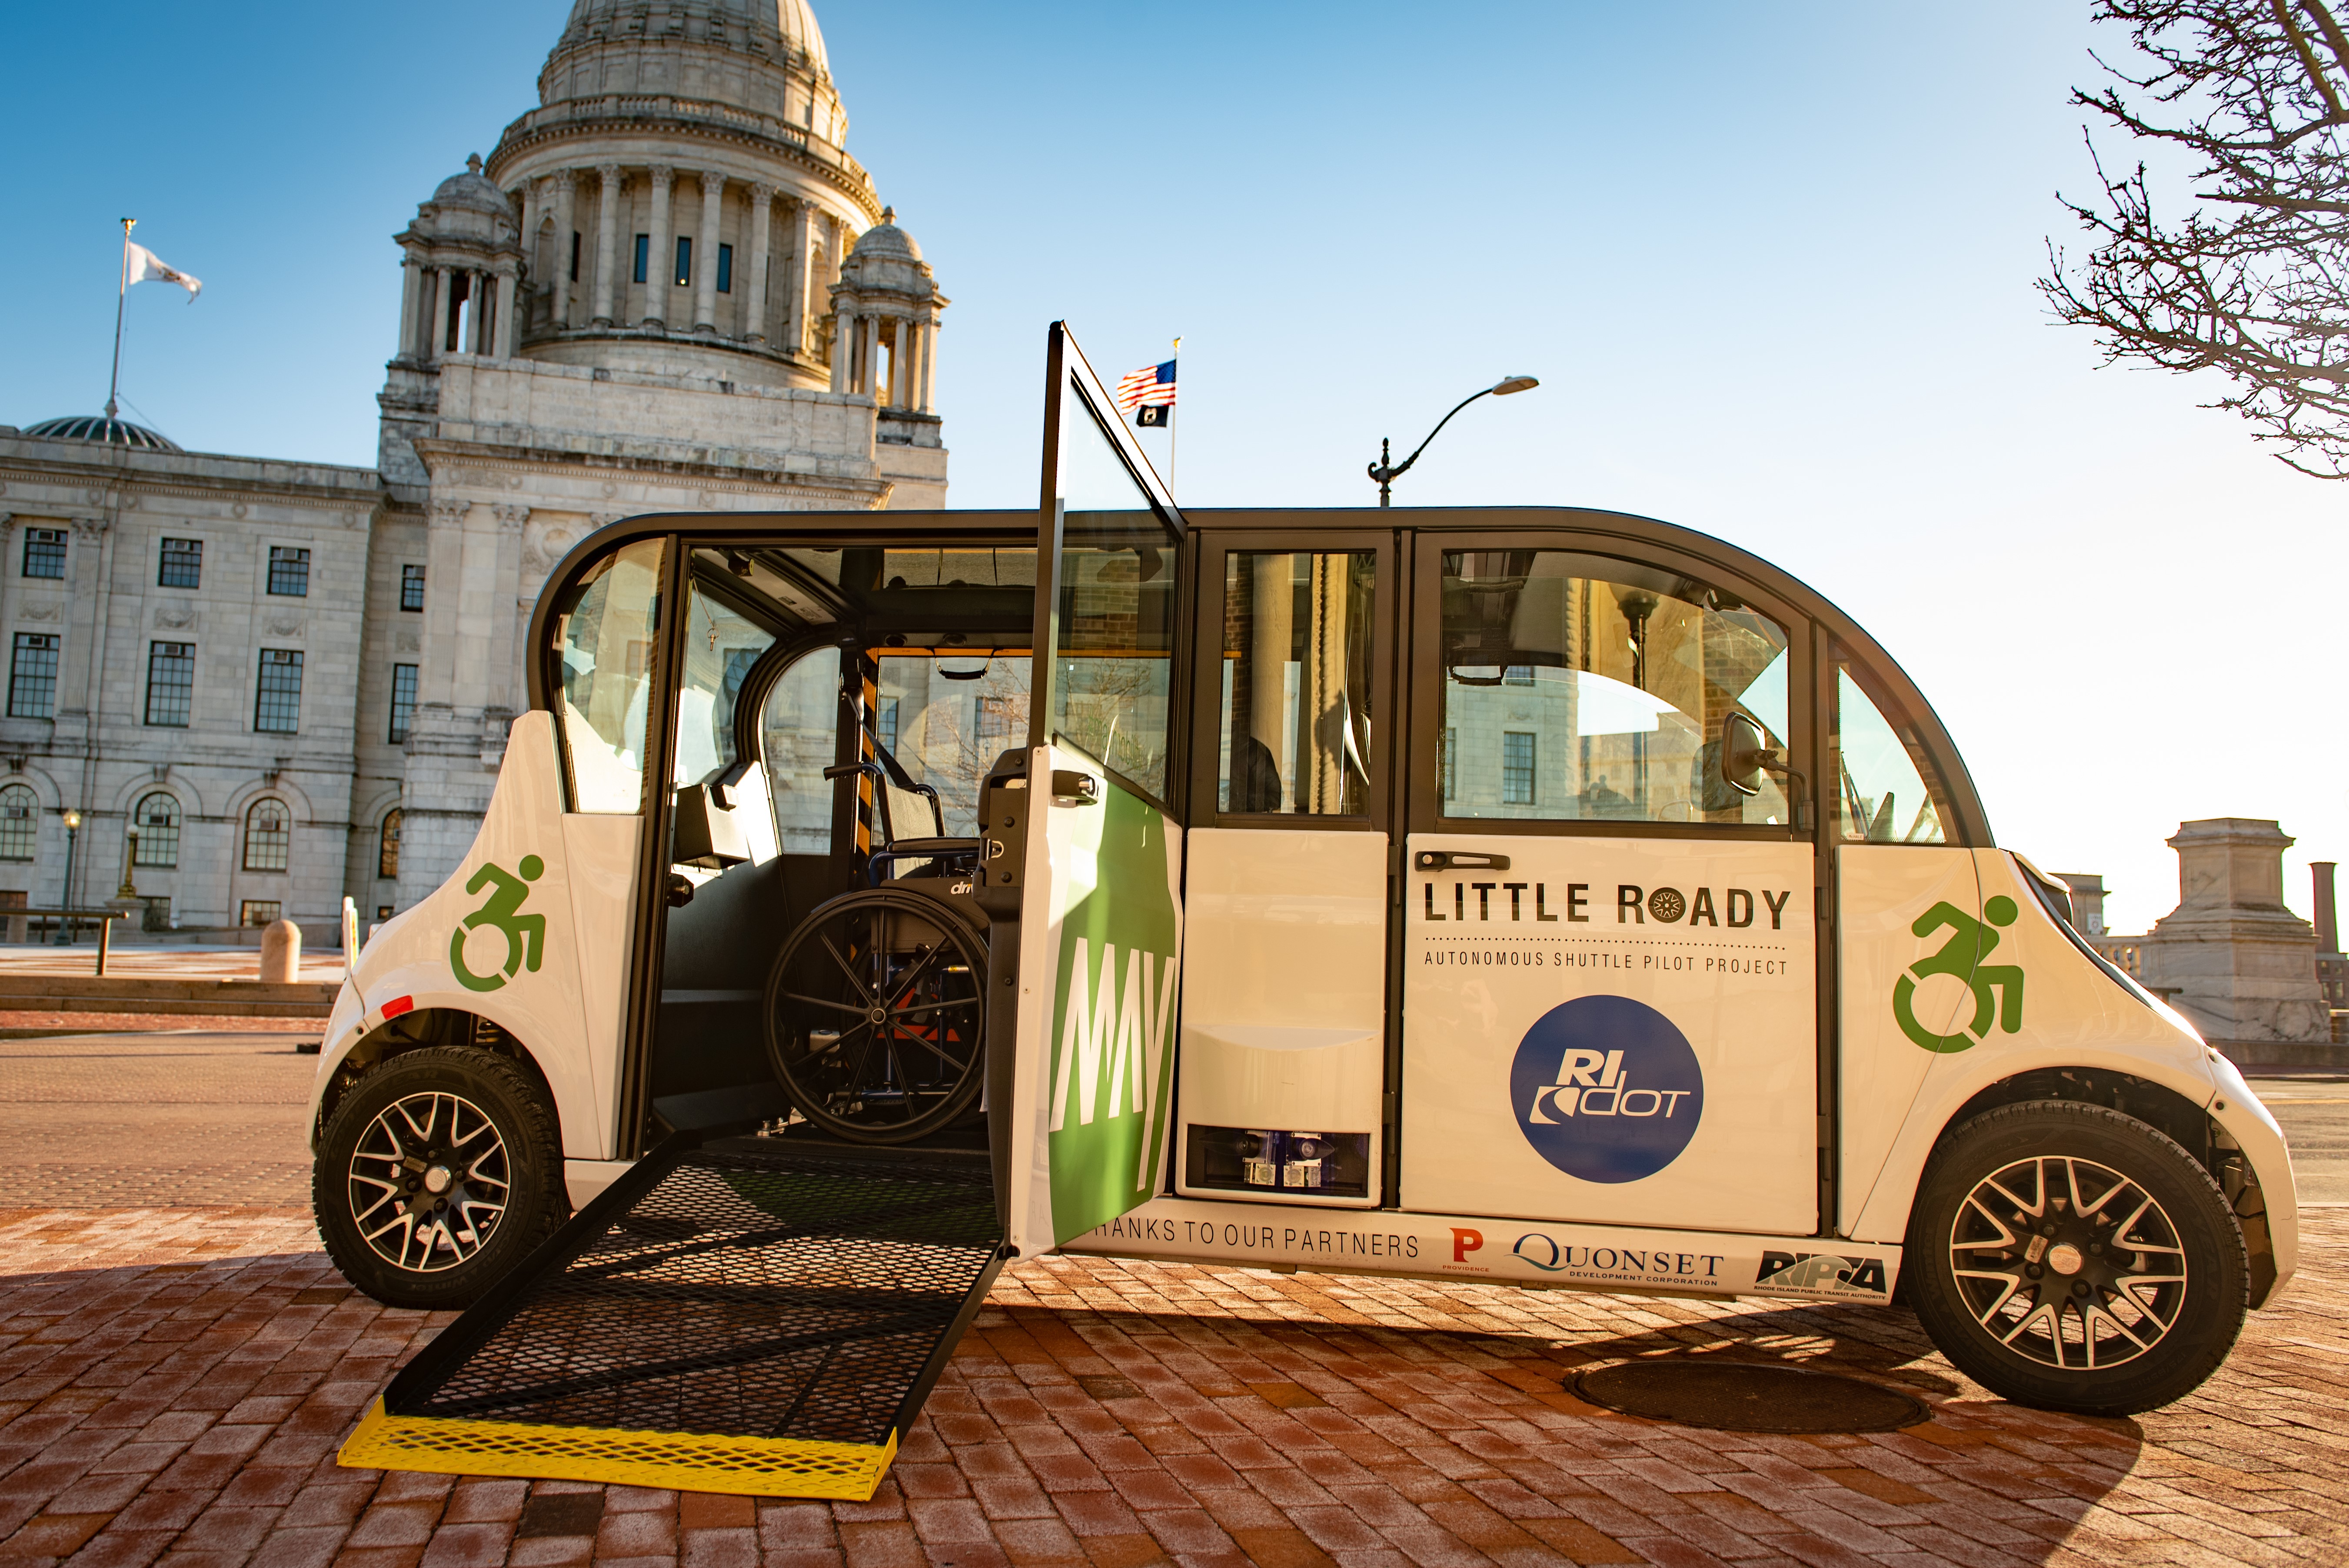 May Mobility's "Little Roady" autonomous shuttle in Providence, Rhode Island